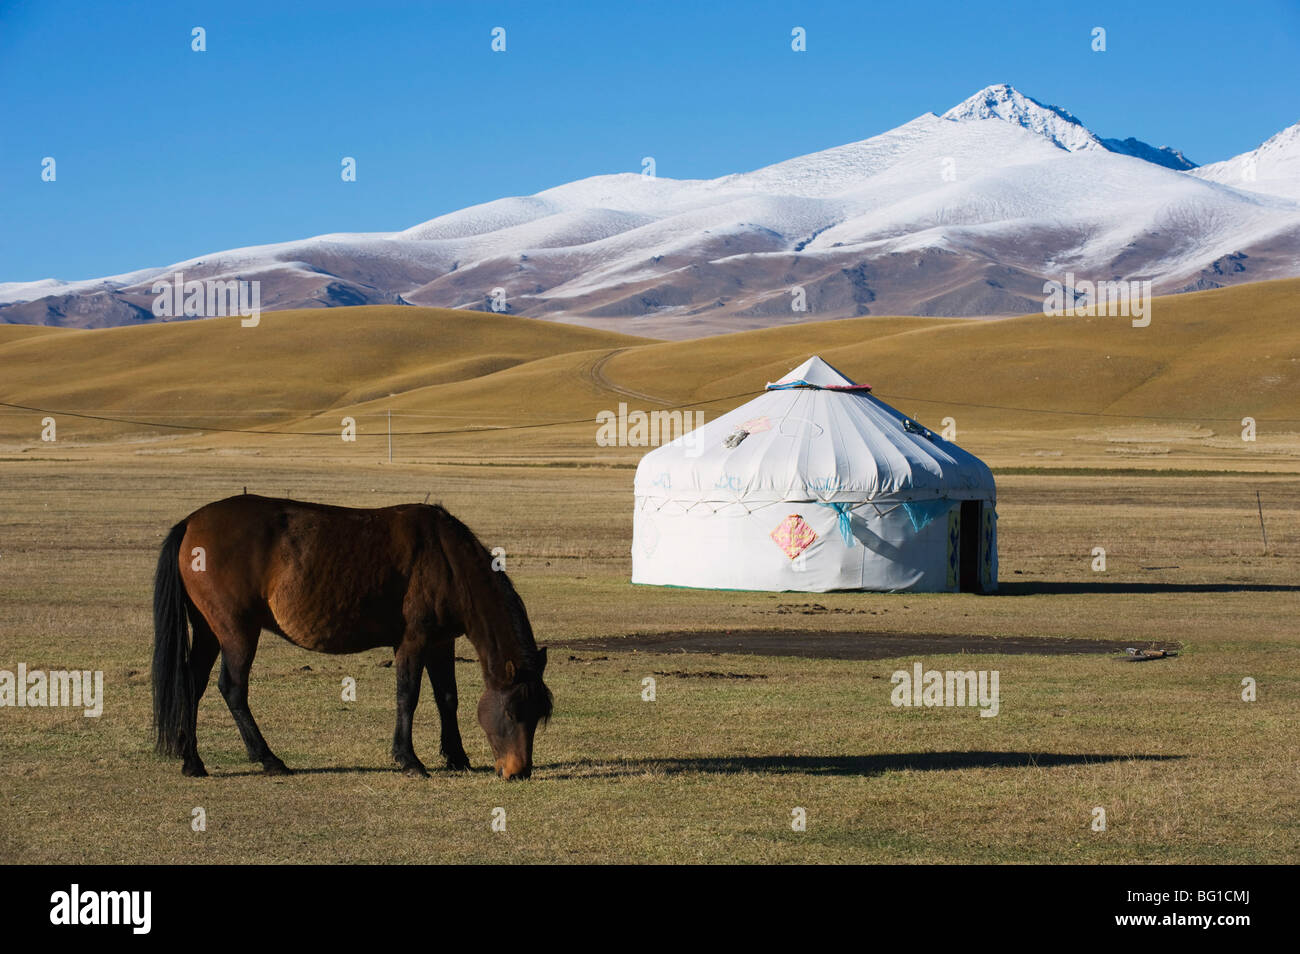 Nomads cheval et yourte, Bayanbulak, Province du Xinjiang, China, Asia Banque D'Images